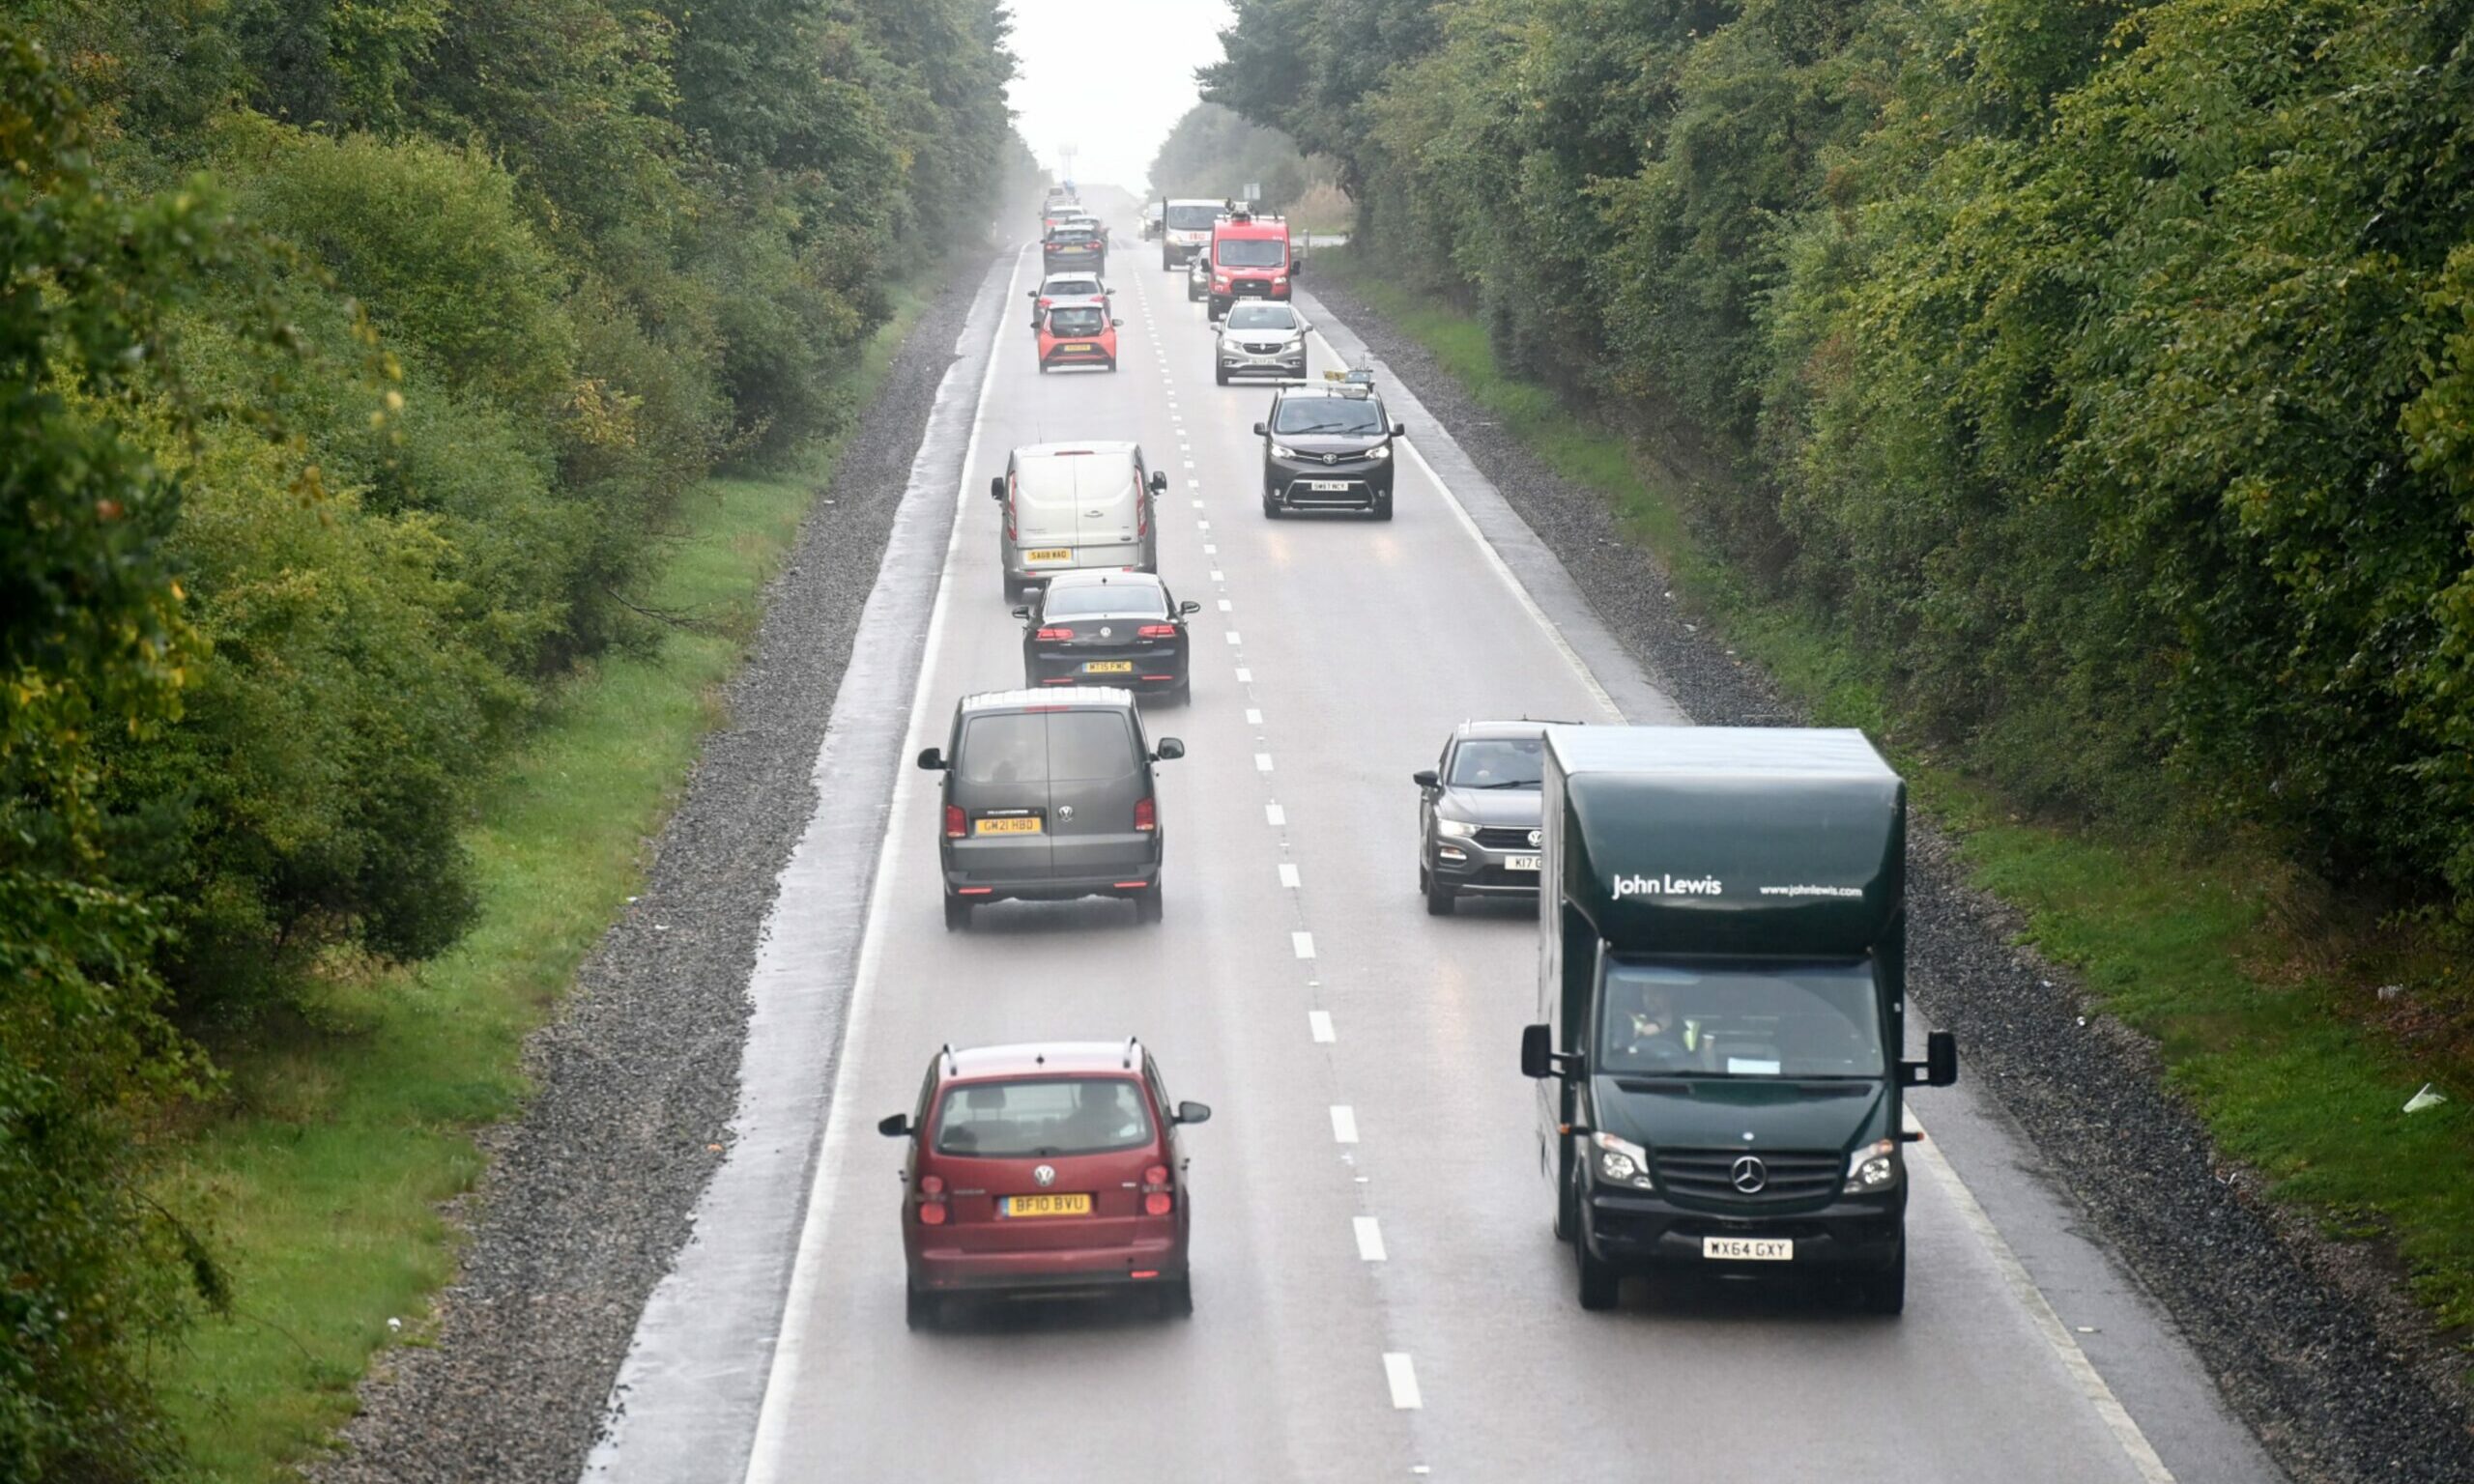 A single carriageway stretch - no A96 dualling - with cars and lorries on it